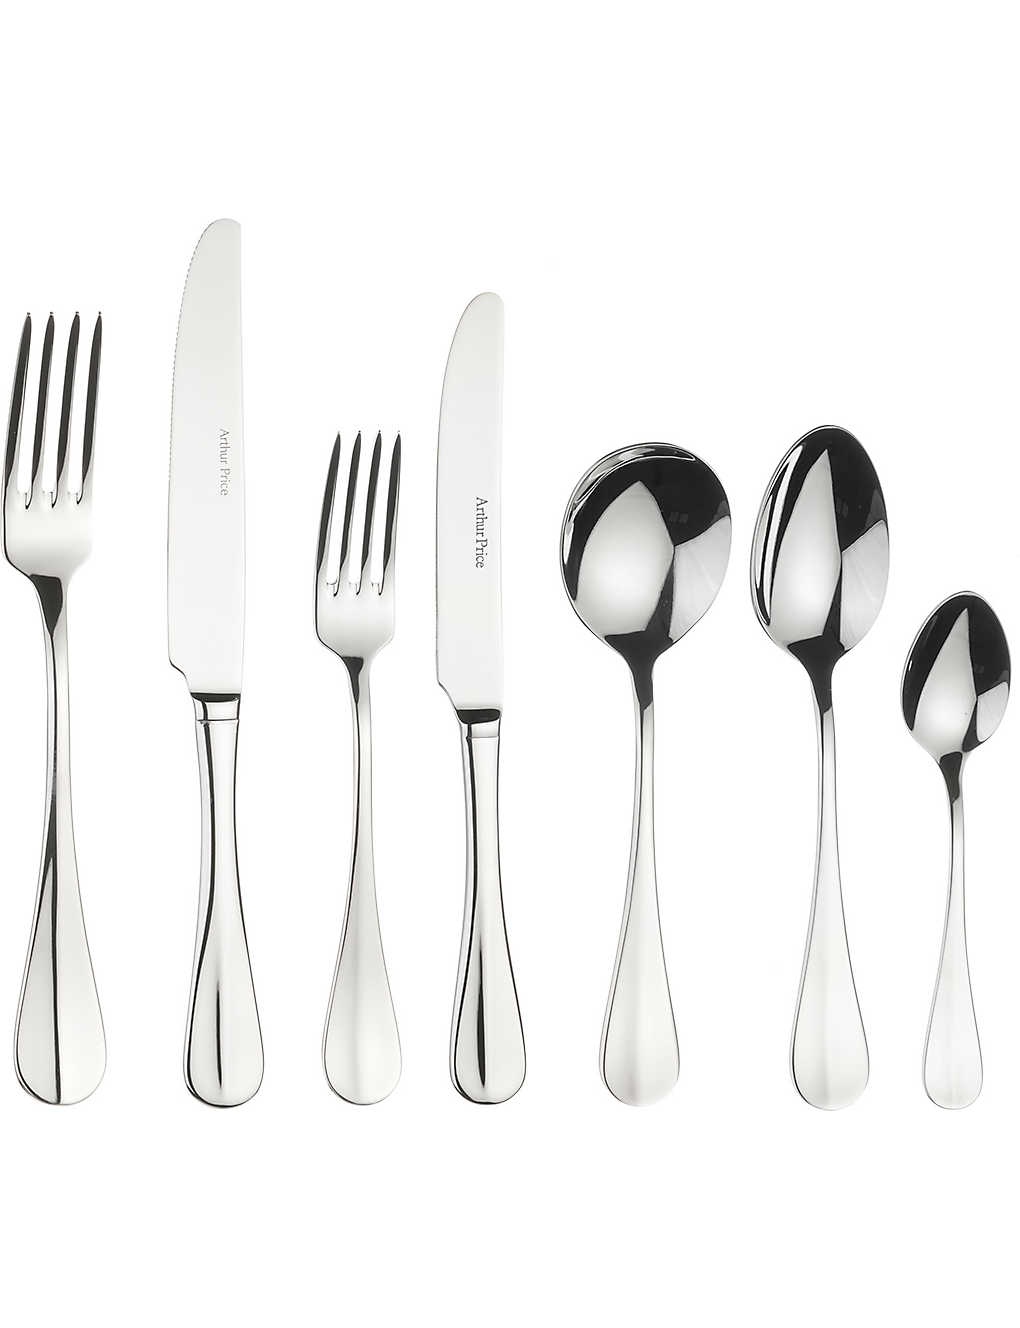 Arthur Price Baguette 7-piece Stainless Steel Place Setting